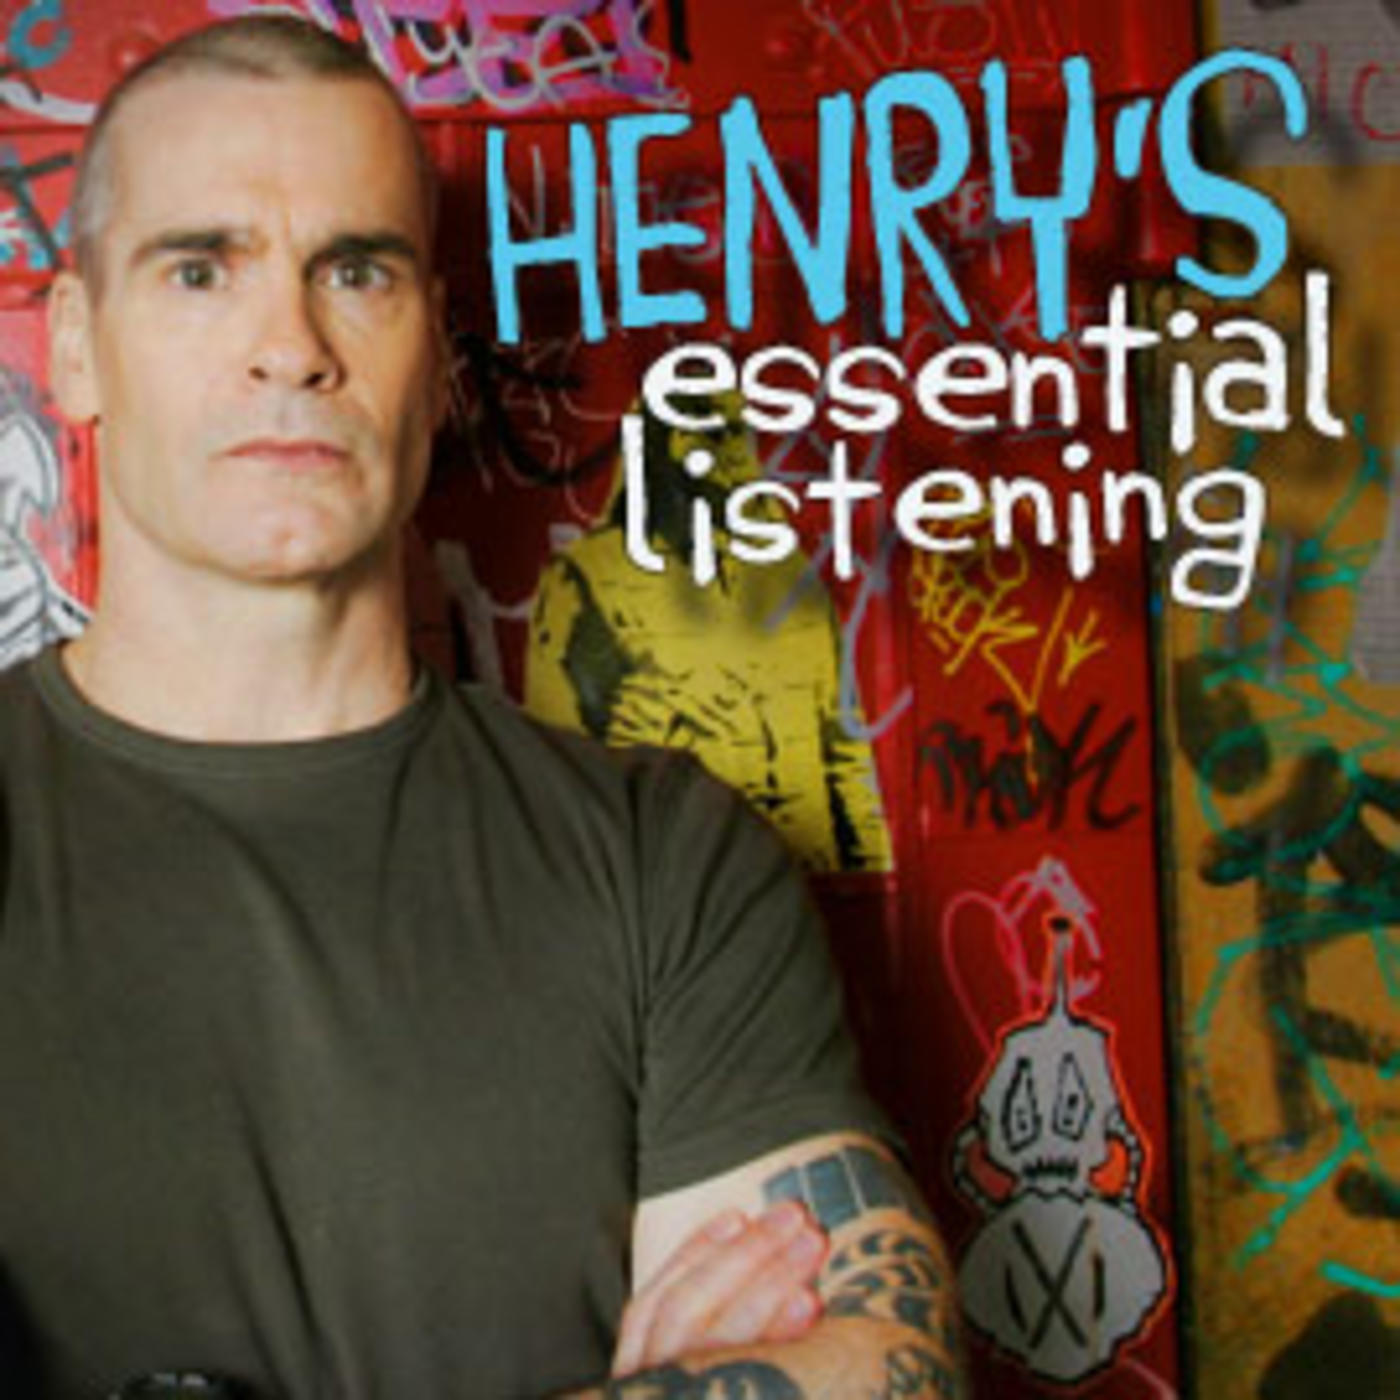 Henry's Essential Listening – Great Punk Rock - Sex Pistols, The Clash, X-Ray Spex, Lockjaw, Generation X, Billy Idol, Eater, Buzzcocks, Wire, The Slits, 999, The Vibrators, UK Subs, Sham 69